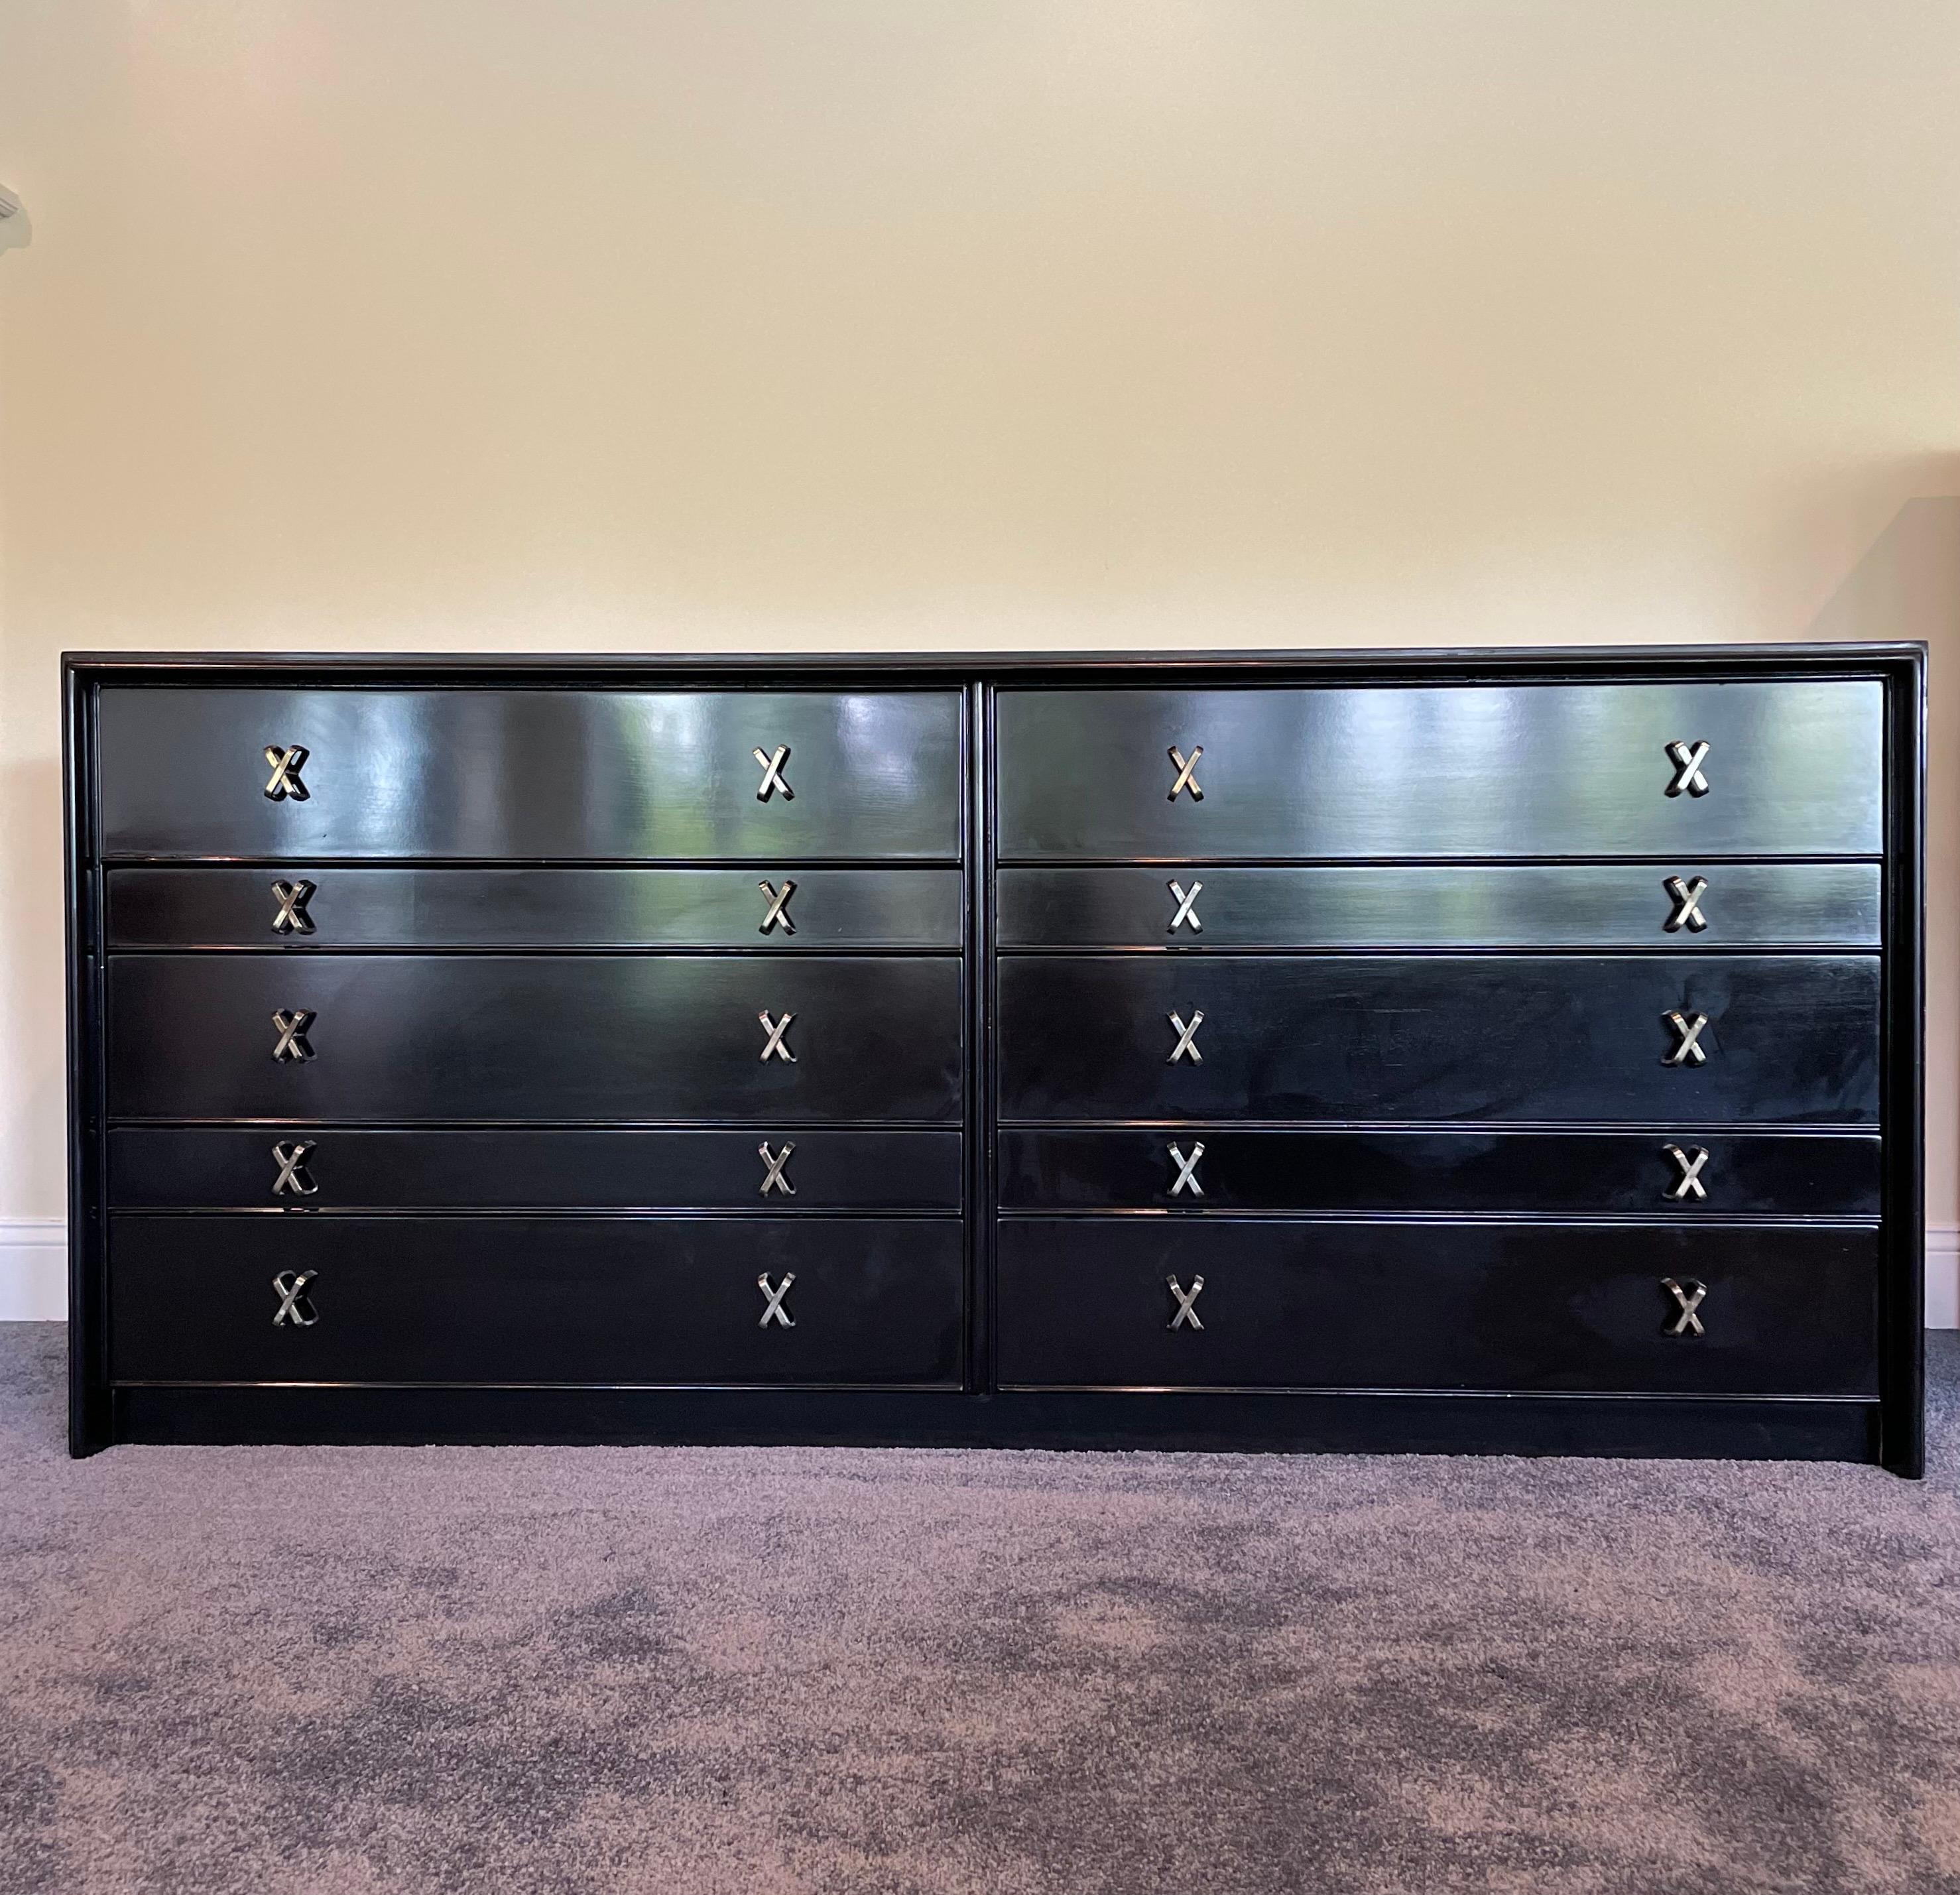 A vintage Paul Frankl dresser with iconic brass “x” knobs and newly lacquered black walnut is a truly exceptional piece of furniture. Its clean, angular lines and elegant proportions make it a true statement piece in any room. Sleek, polished, and